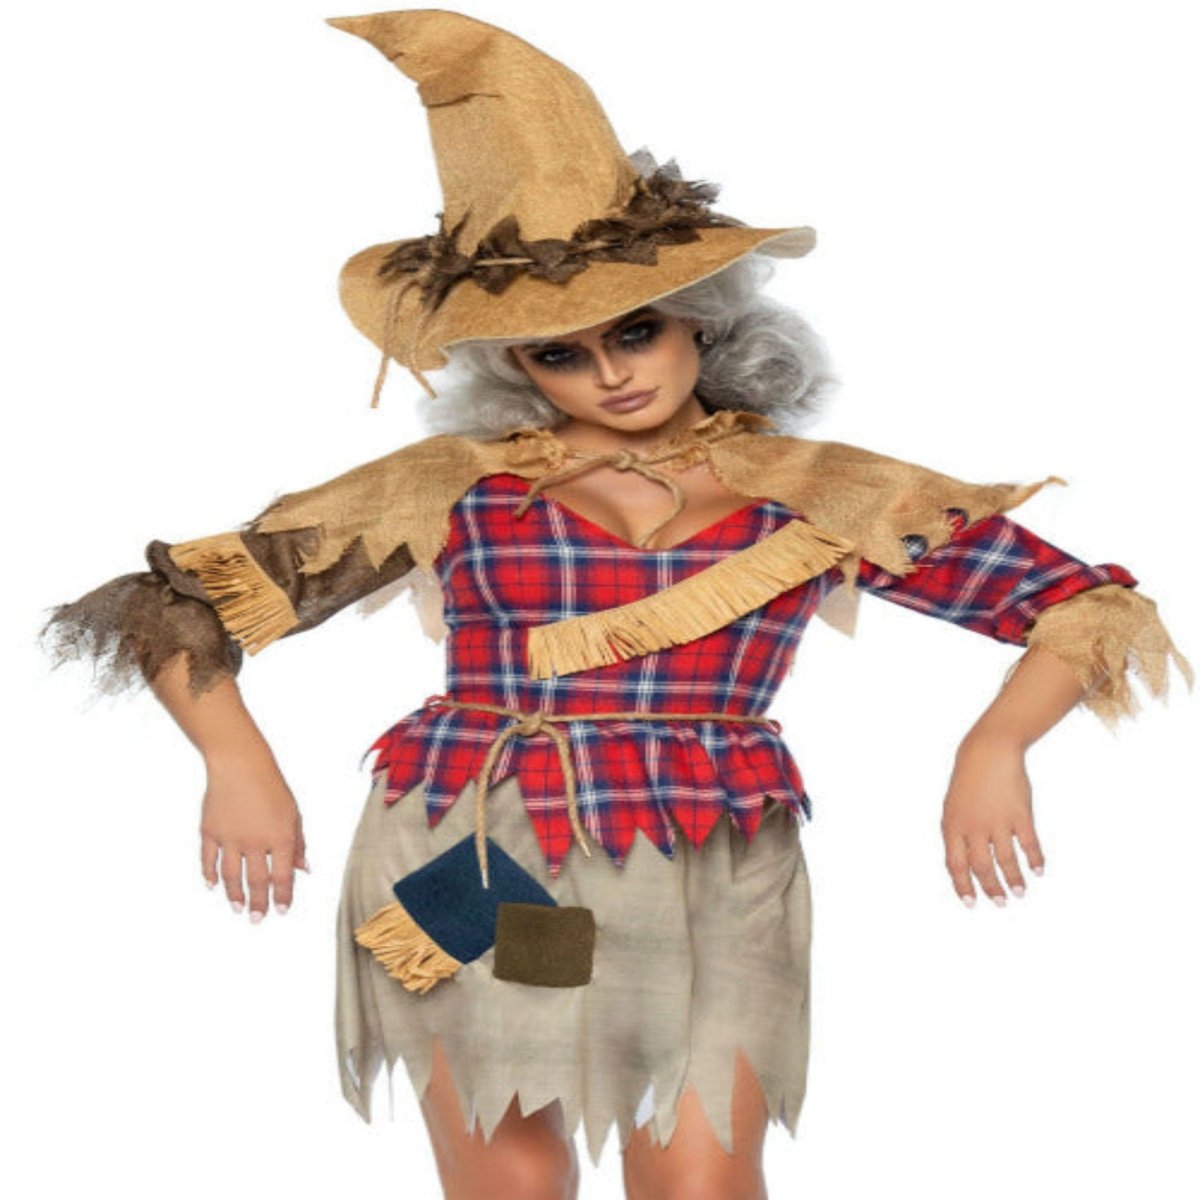 Sinister Scarecrow Costume - worldclasscostumes